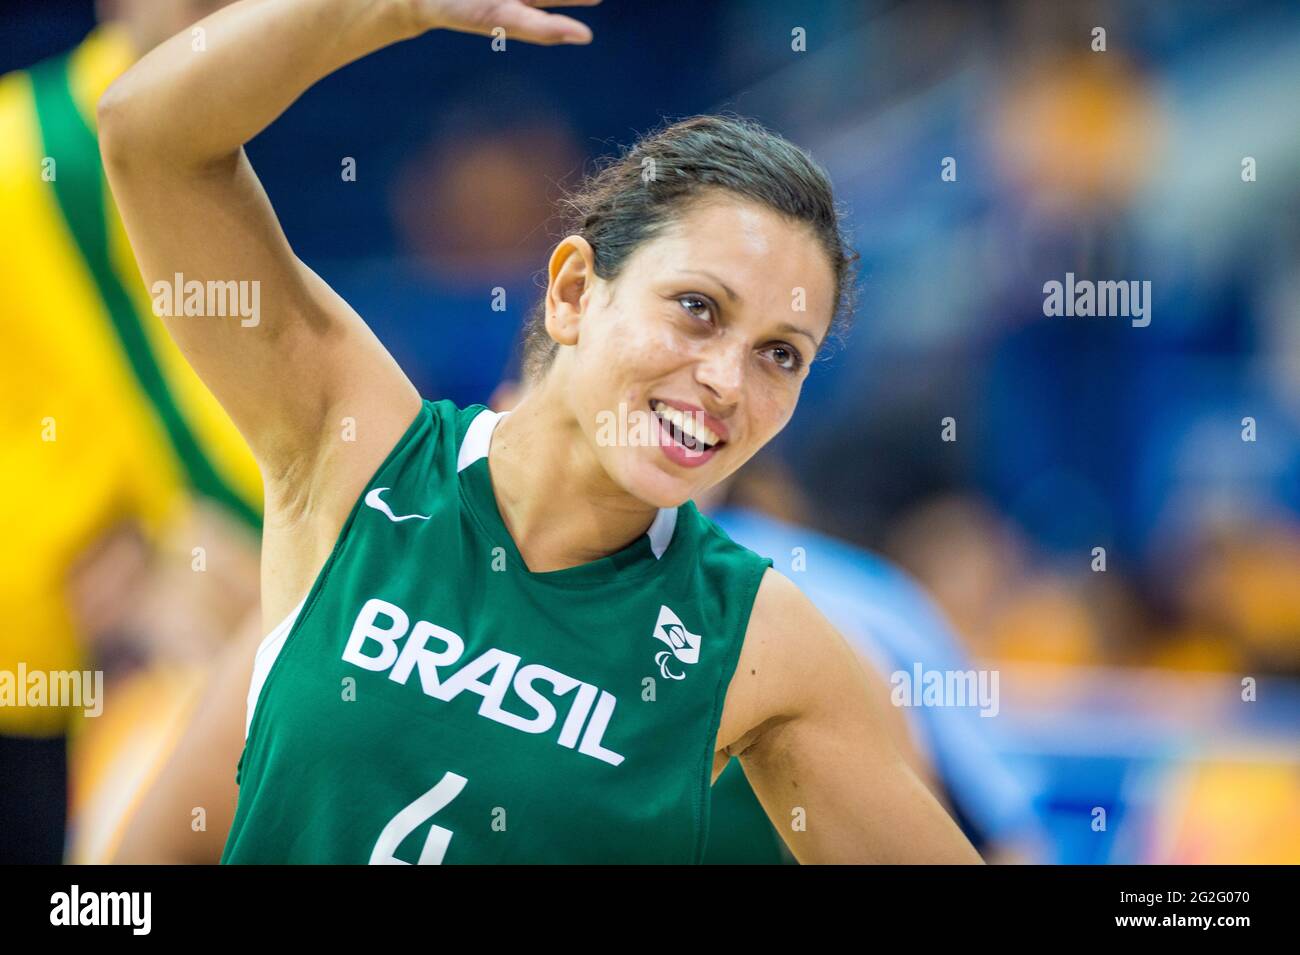 Ivanilde Silva is happy when Brazil defeats Argentina and wins the Bronze Medal in the finals of the Women's Wheelchair Basketball during the Parapan Stock Photo